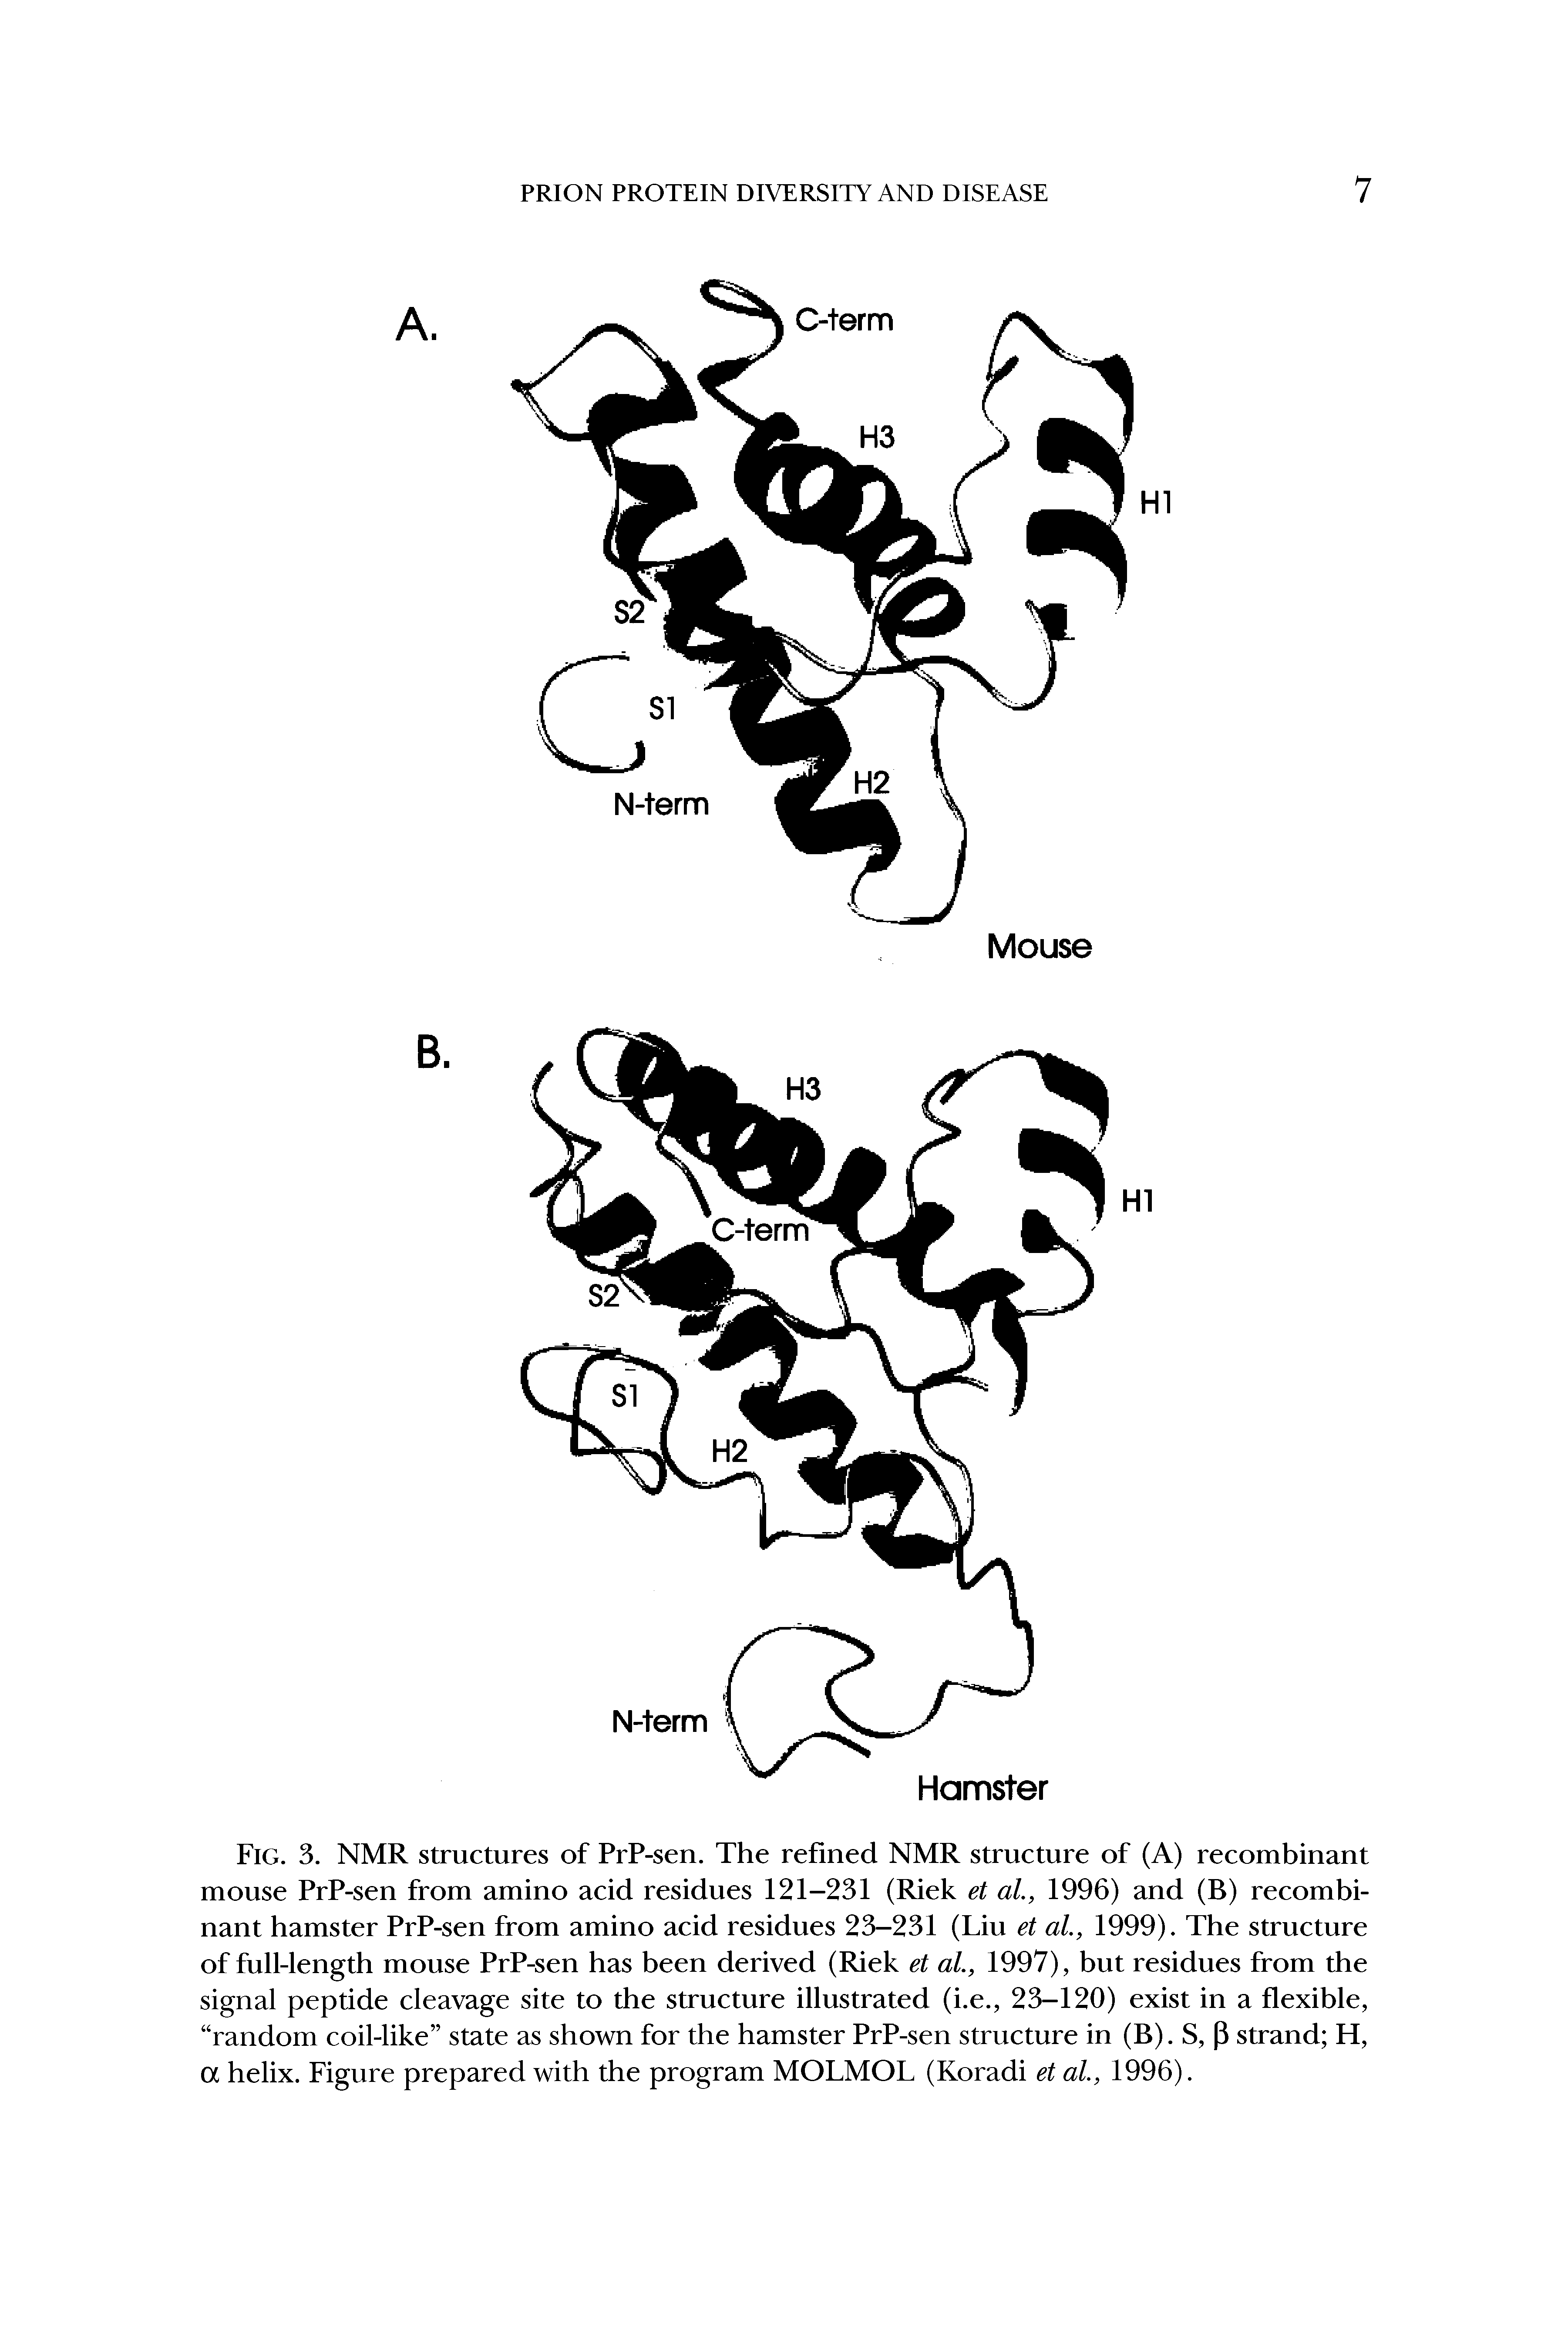 Fig. 3. NMR structures of PrP-sen. The refined NMR structure of (A) recombinant mouse PrP-sen from amino acid residues 121-231 (Riek et al., 1996) and (B) recombinant hamster PrP-sen from amino acid residues 23-231 (Liu et al, 1999). The structure of full-length mouse PrP-sen has been derived (Riek et al., 1997), but residues from the signal peptide cleavage site to the structure illustrated (i.e., 23-120) exist in a flexible, random coil-like state as shown for the hamster PrP-sen structure in (B). S, P strand H, a helix. Figure prepared with the program MOLMOL (Koradi et al, 1996).